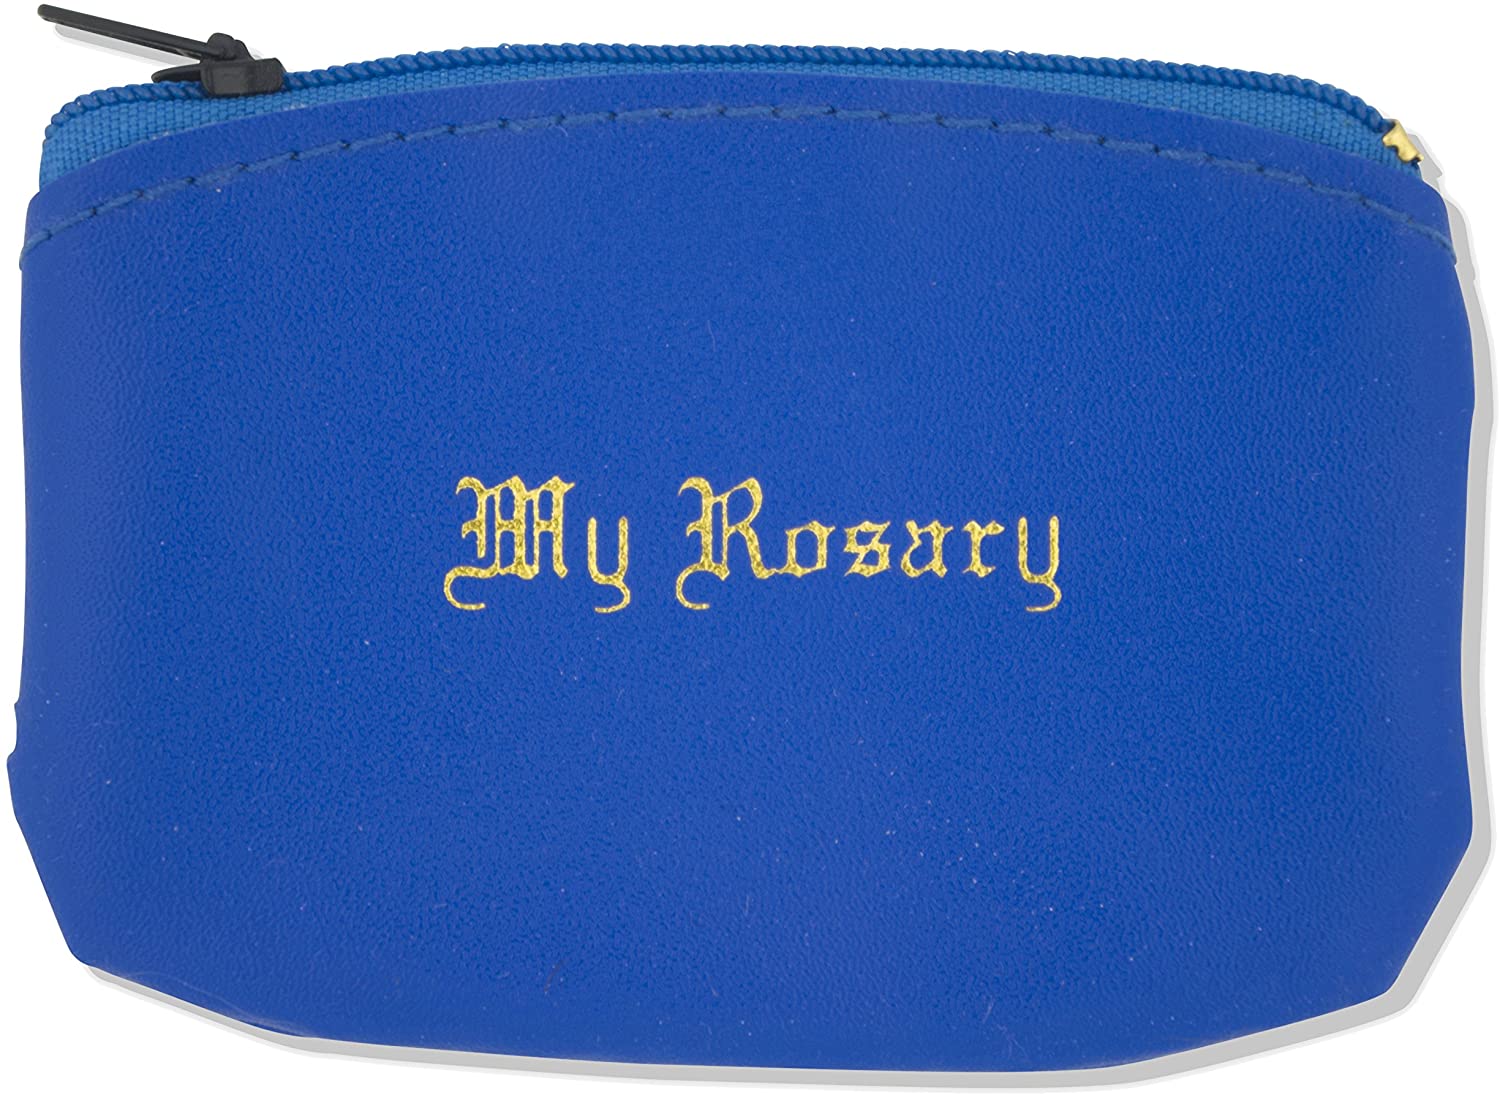 Traditional rosary bag with embossed blue.jpg